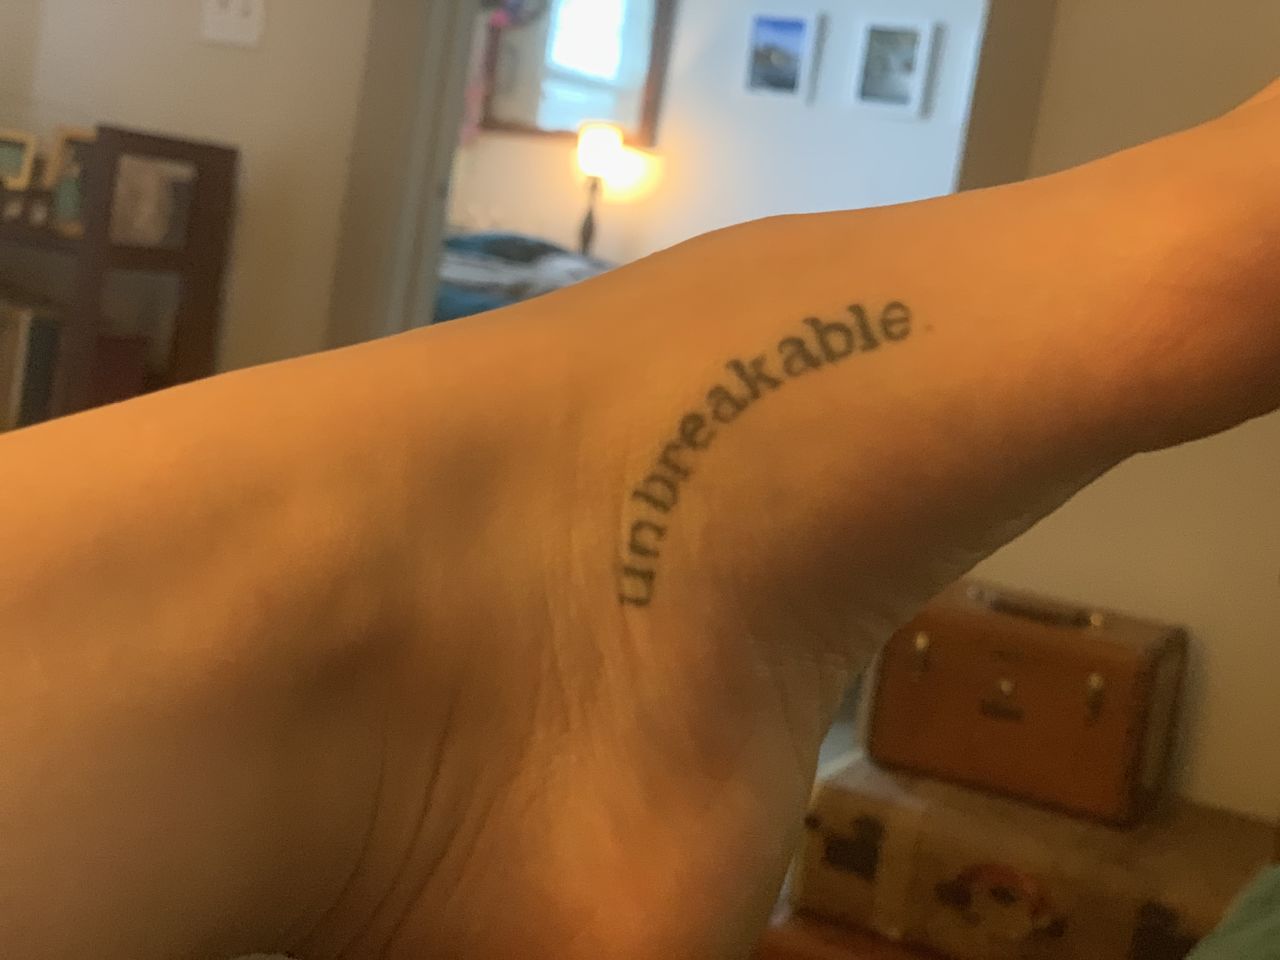 Olivia Adamson, 24, has multiple tattoos. The "unbreakable" tattoo pictured here symbolizes her overcoming sexual assault. "It was exciting and powerful because they had so much meaning behind them," she said. Getting a tattoo, for her, is like a therapy session that is always with her.